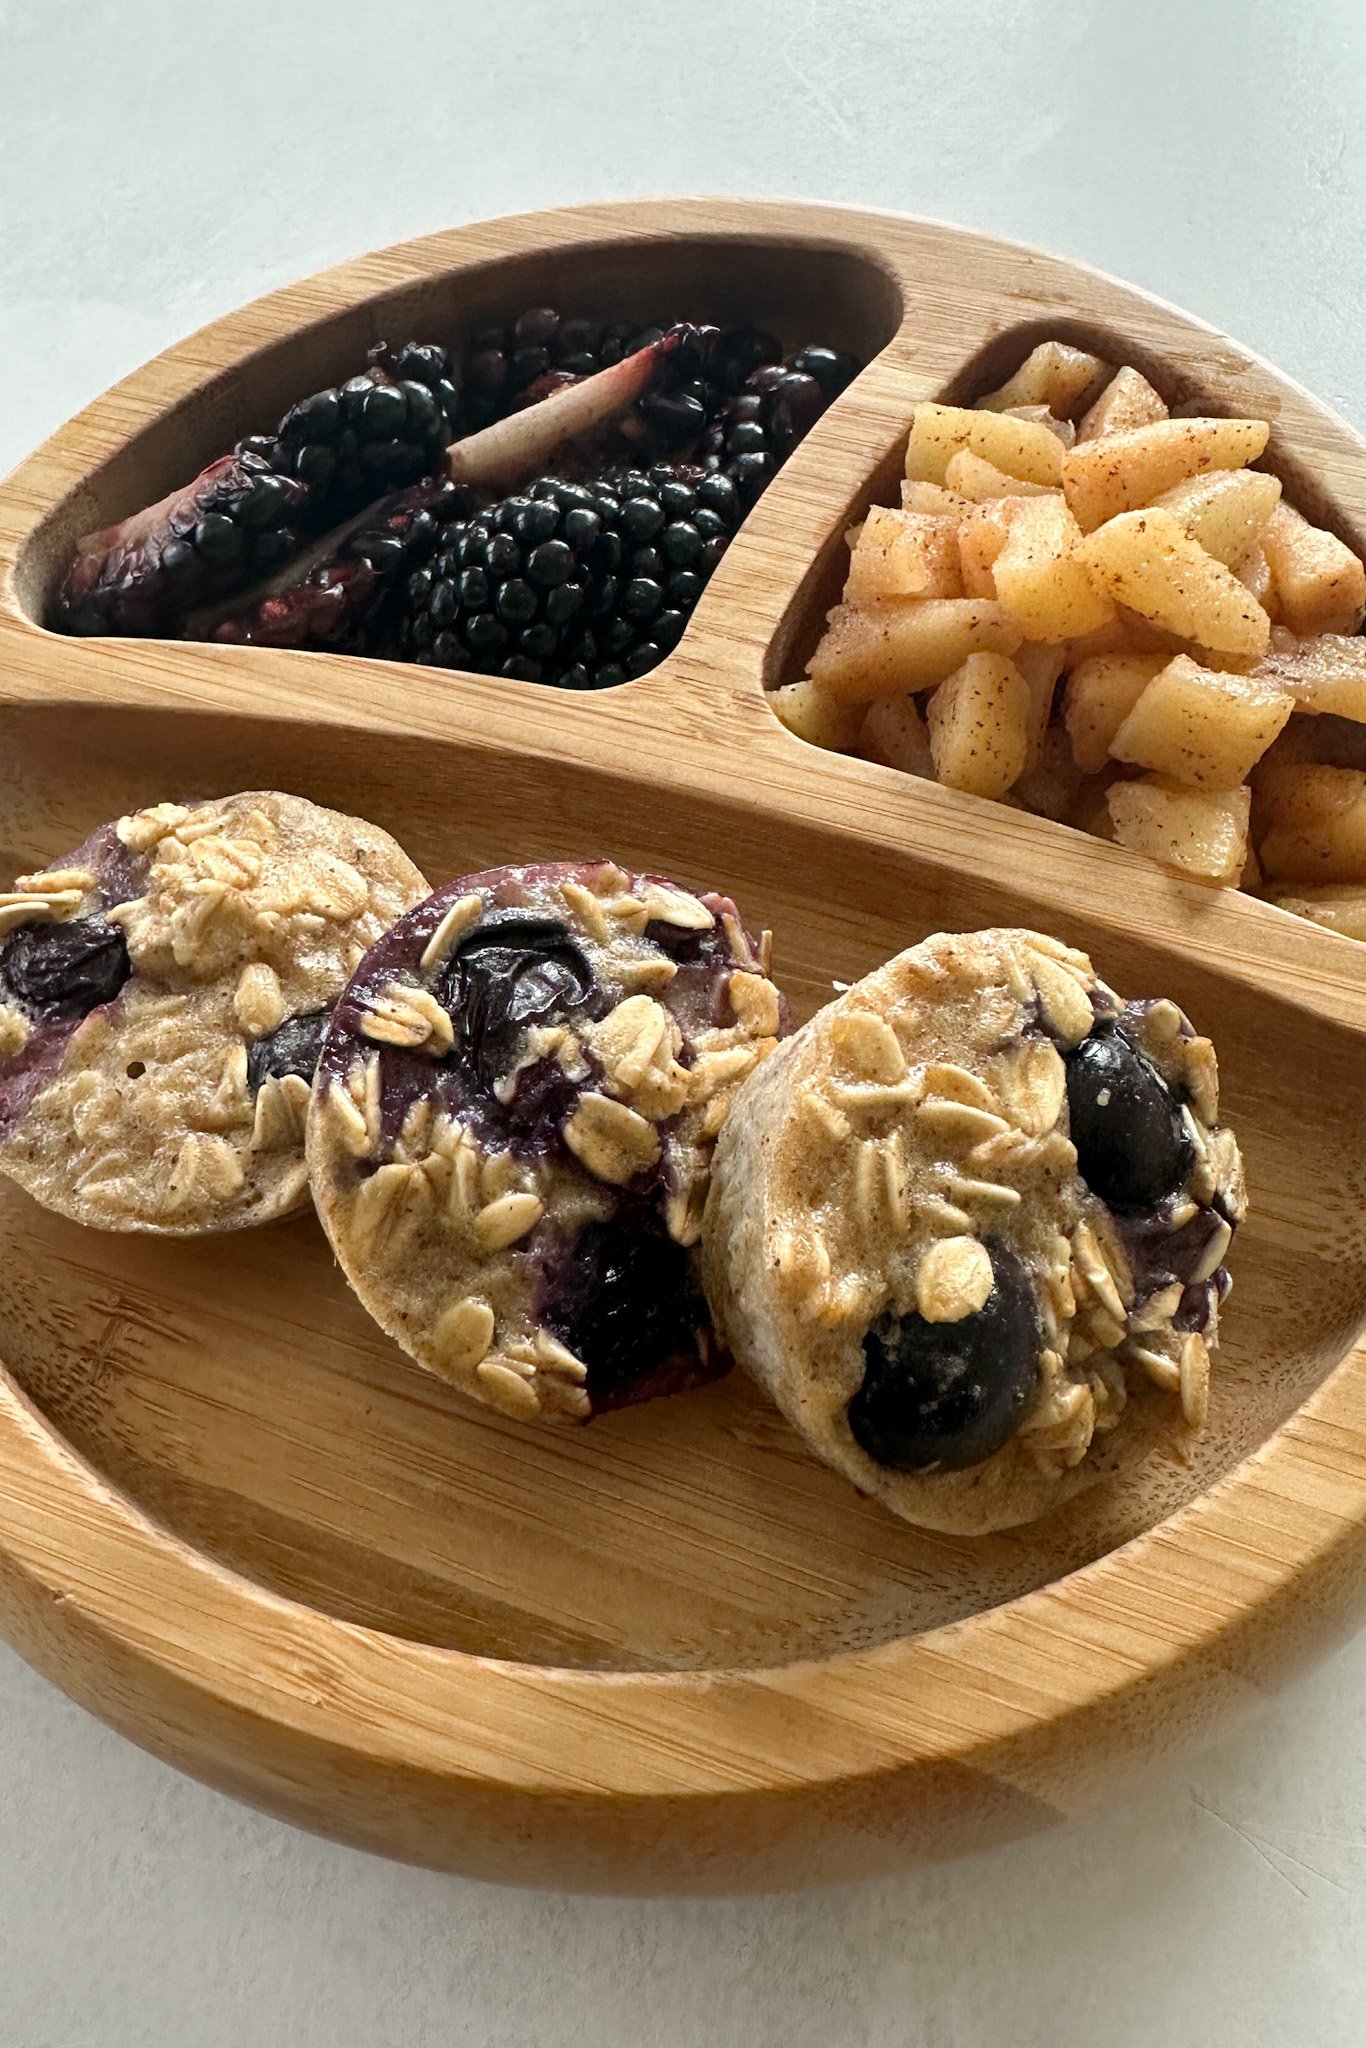 Blueberry oat bites served with fruits.